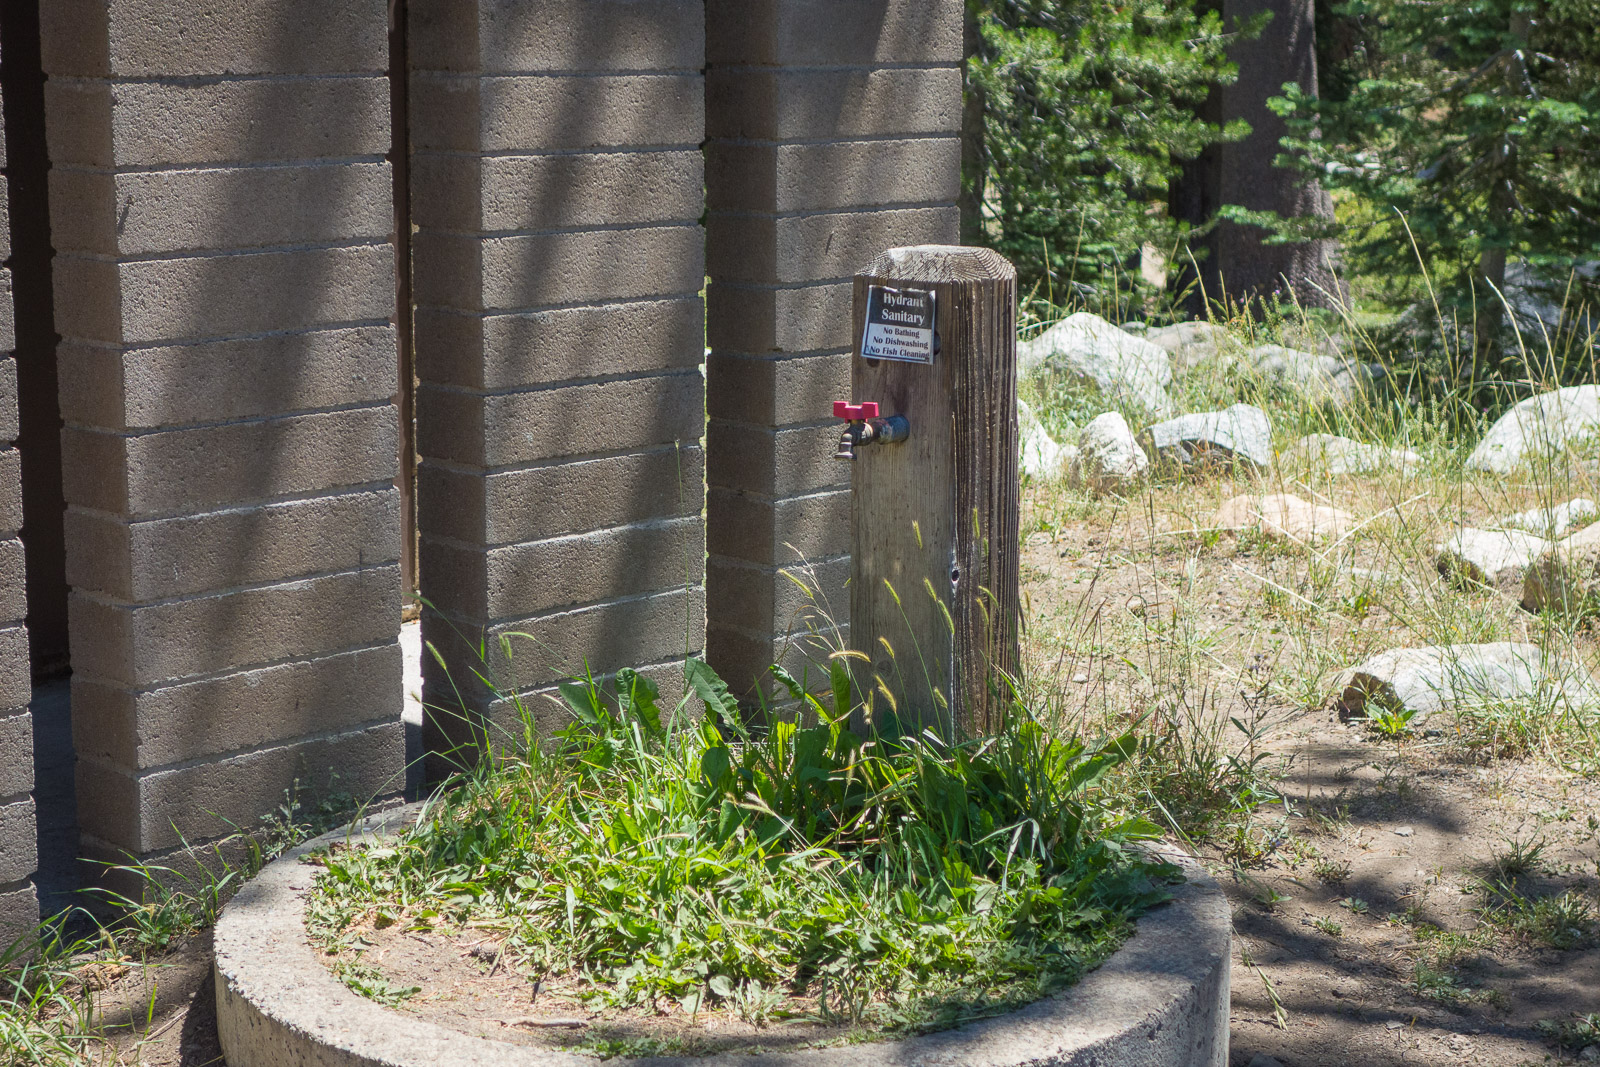 USFS had turned off this hydrant.  Last time I came by this spot, the hydrant was functioning.  Fortunately, the shut-off valve leaked, so I was able to get a dribble from the tap when I turned the red handle, enough to fill a small water bottle in about 5 minutes.  It was all I needed.